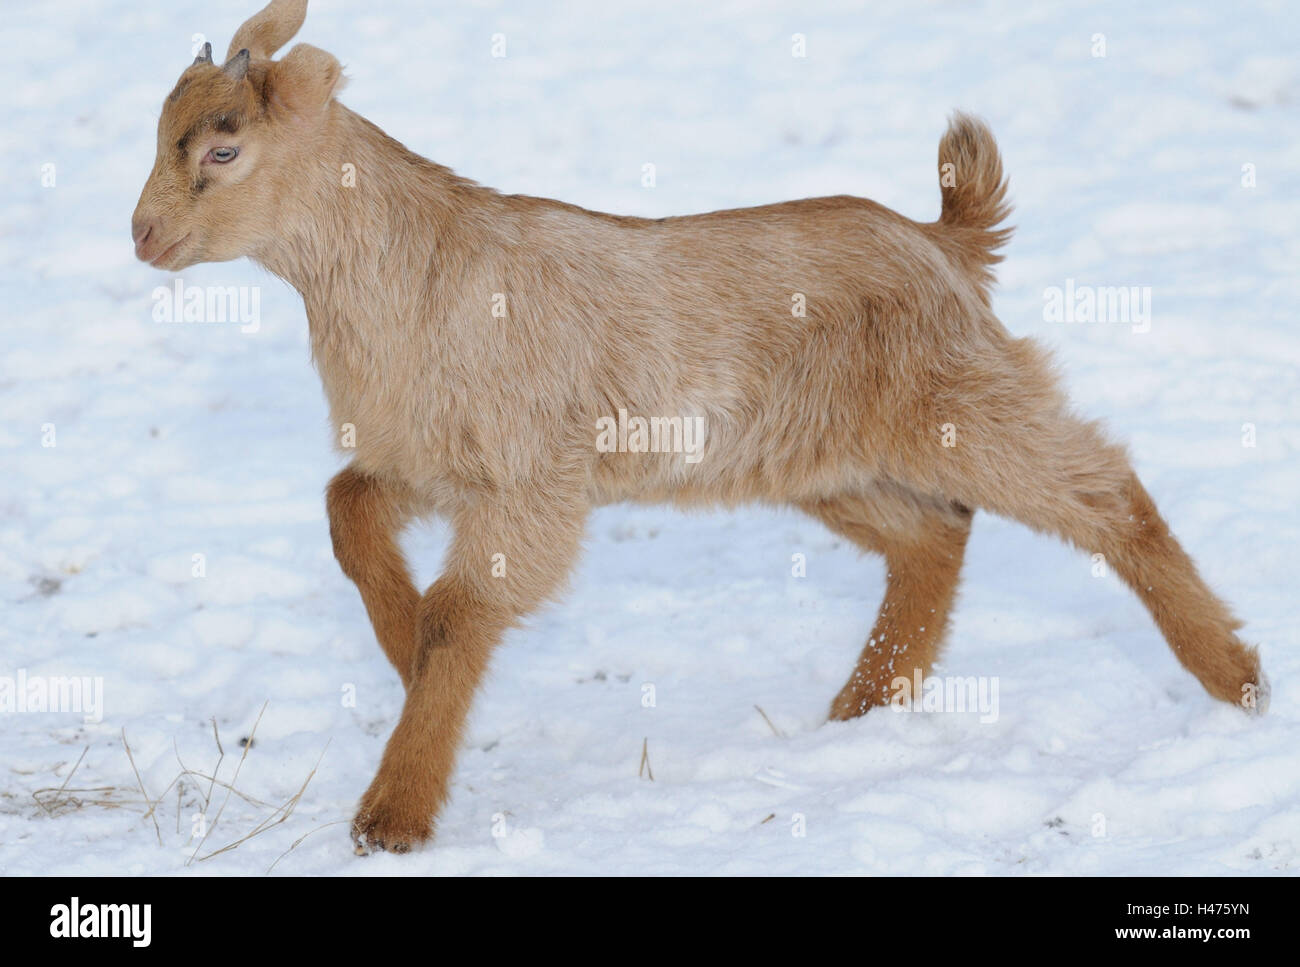 Boer goat, young animal, side view, running, Stock Photo